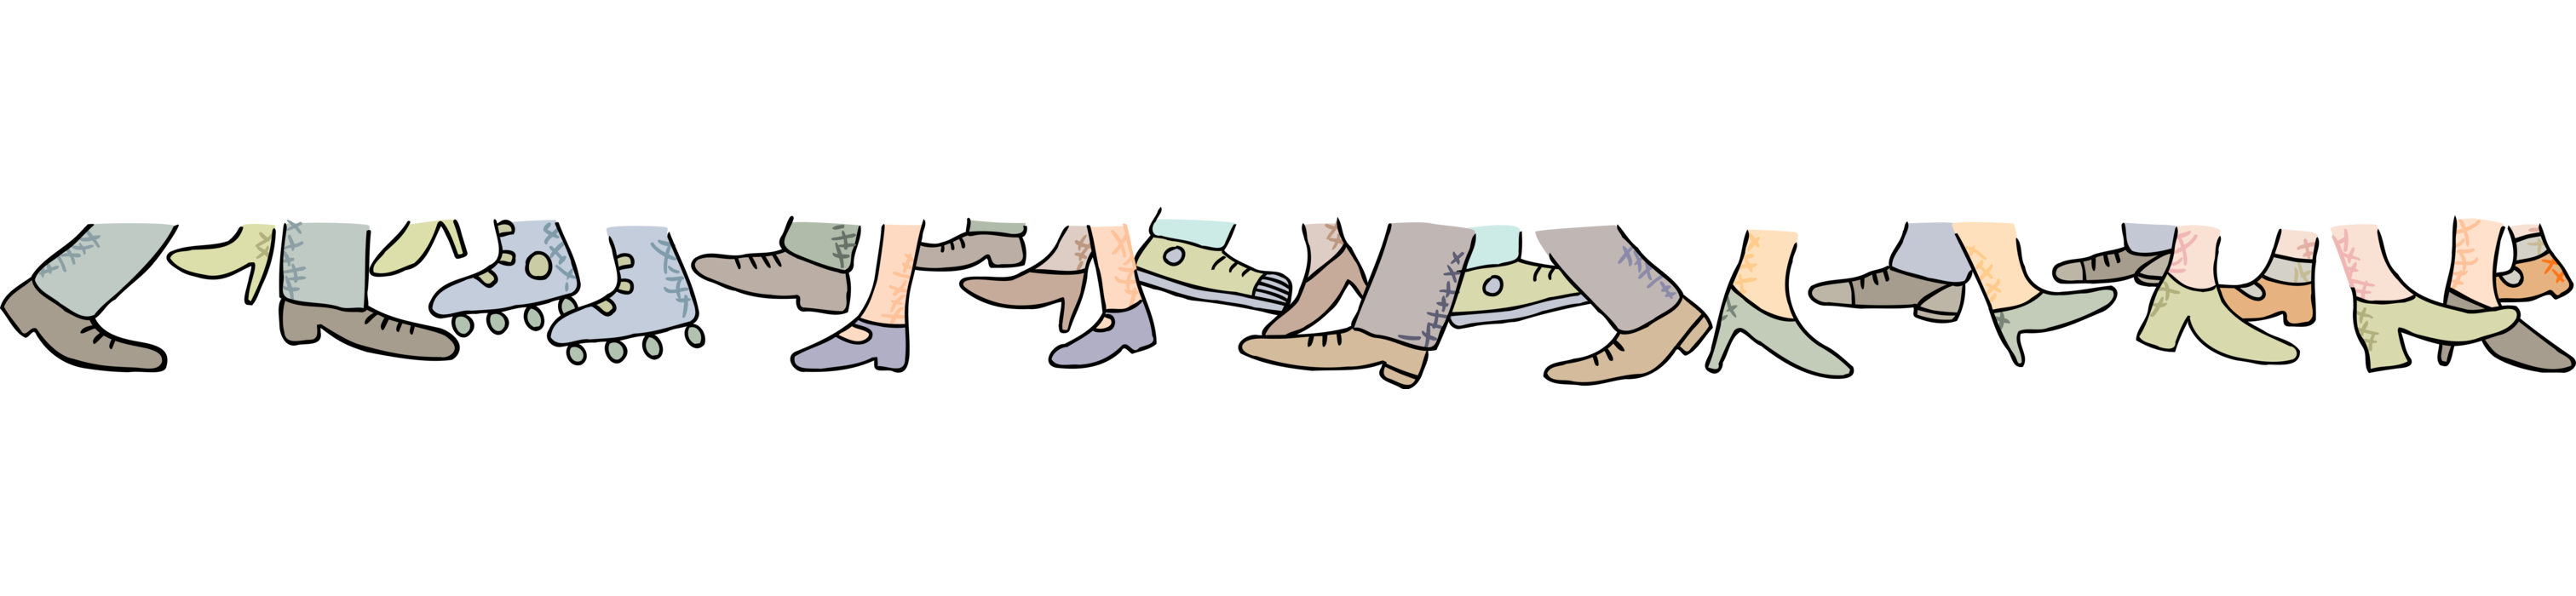 Vector Illustration of Pedestrian Traffic with Feet and Footwear